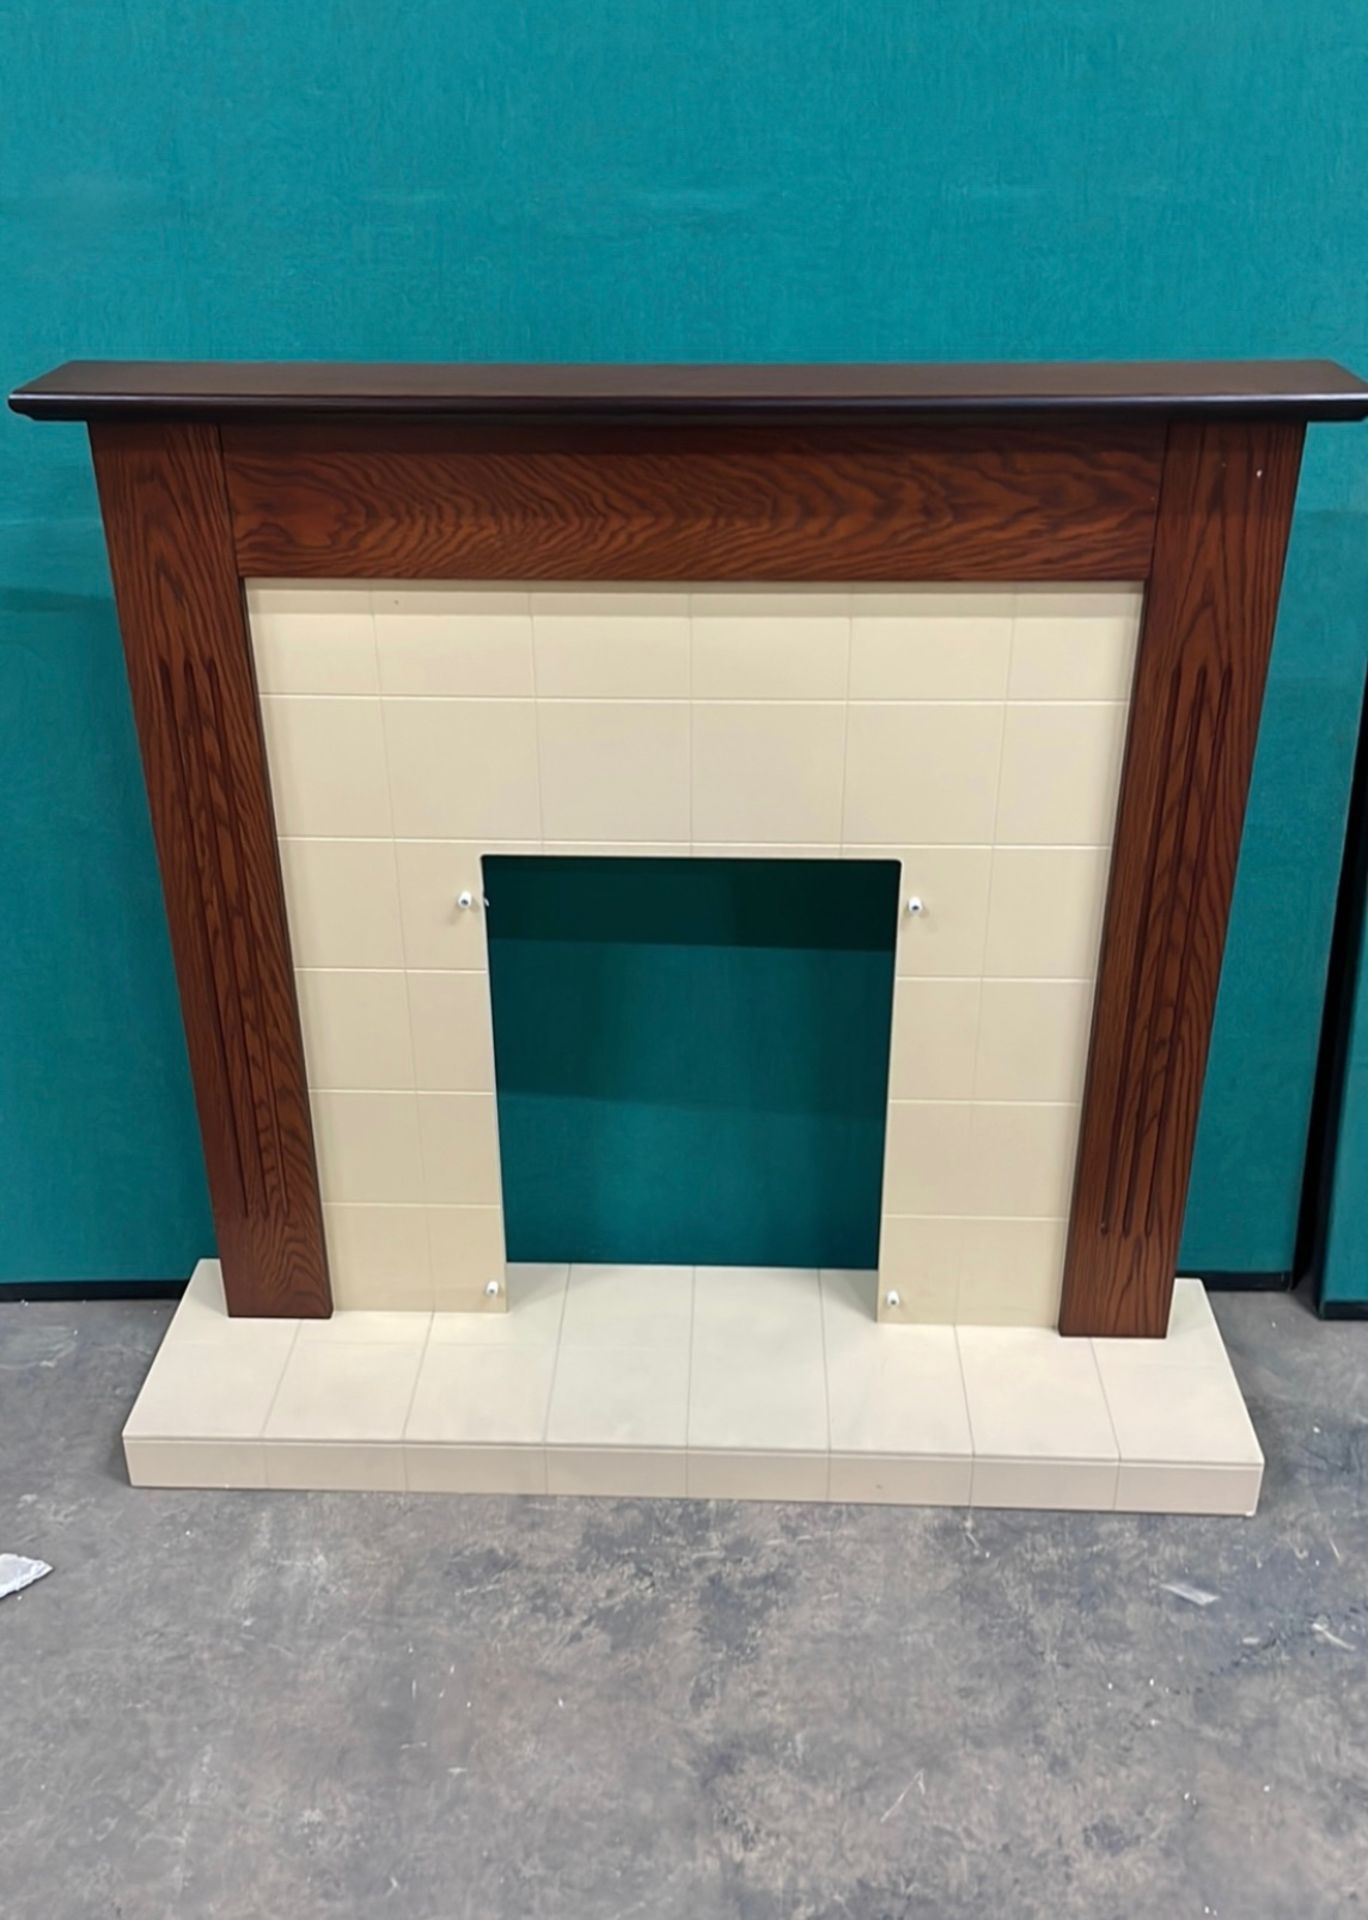 Wooden Fire Surround Display With Tile Detail